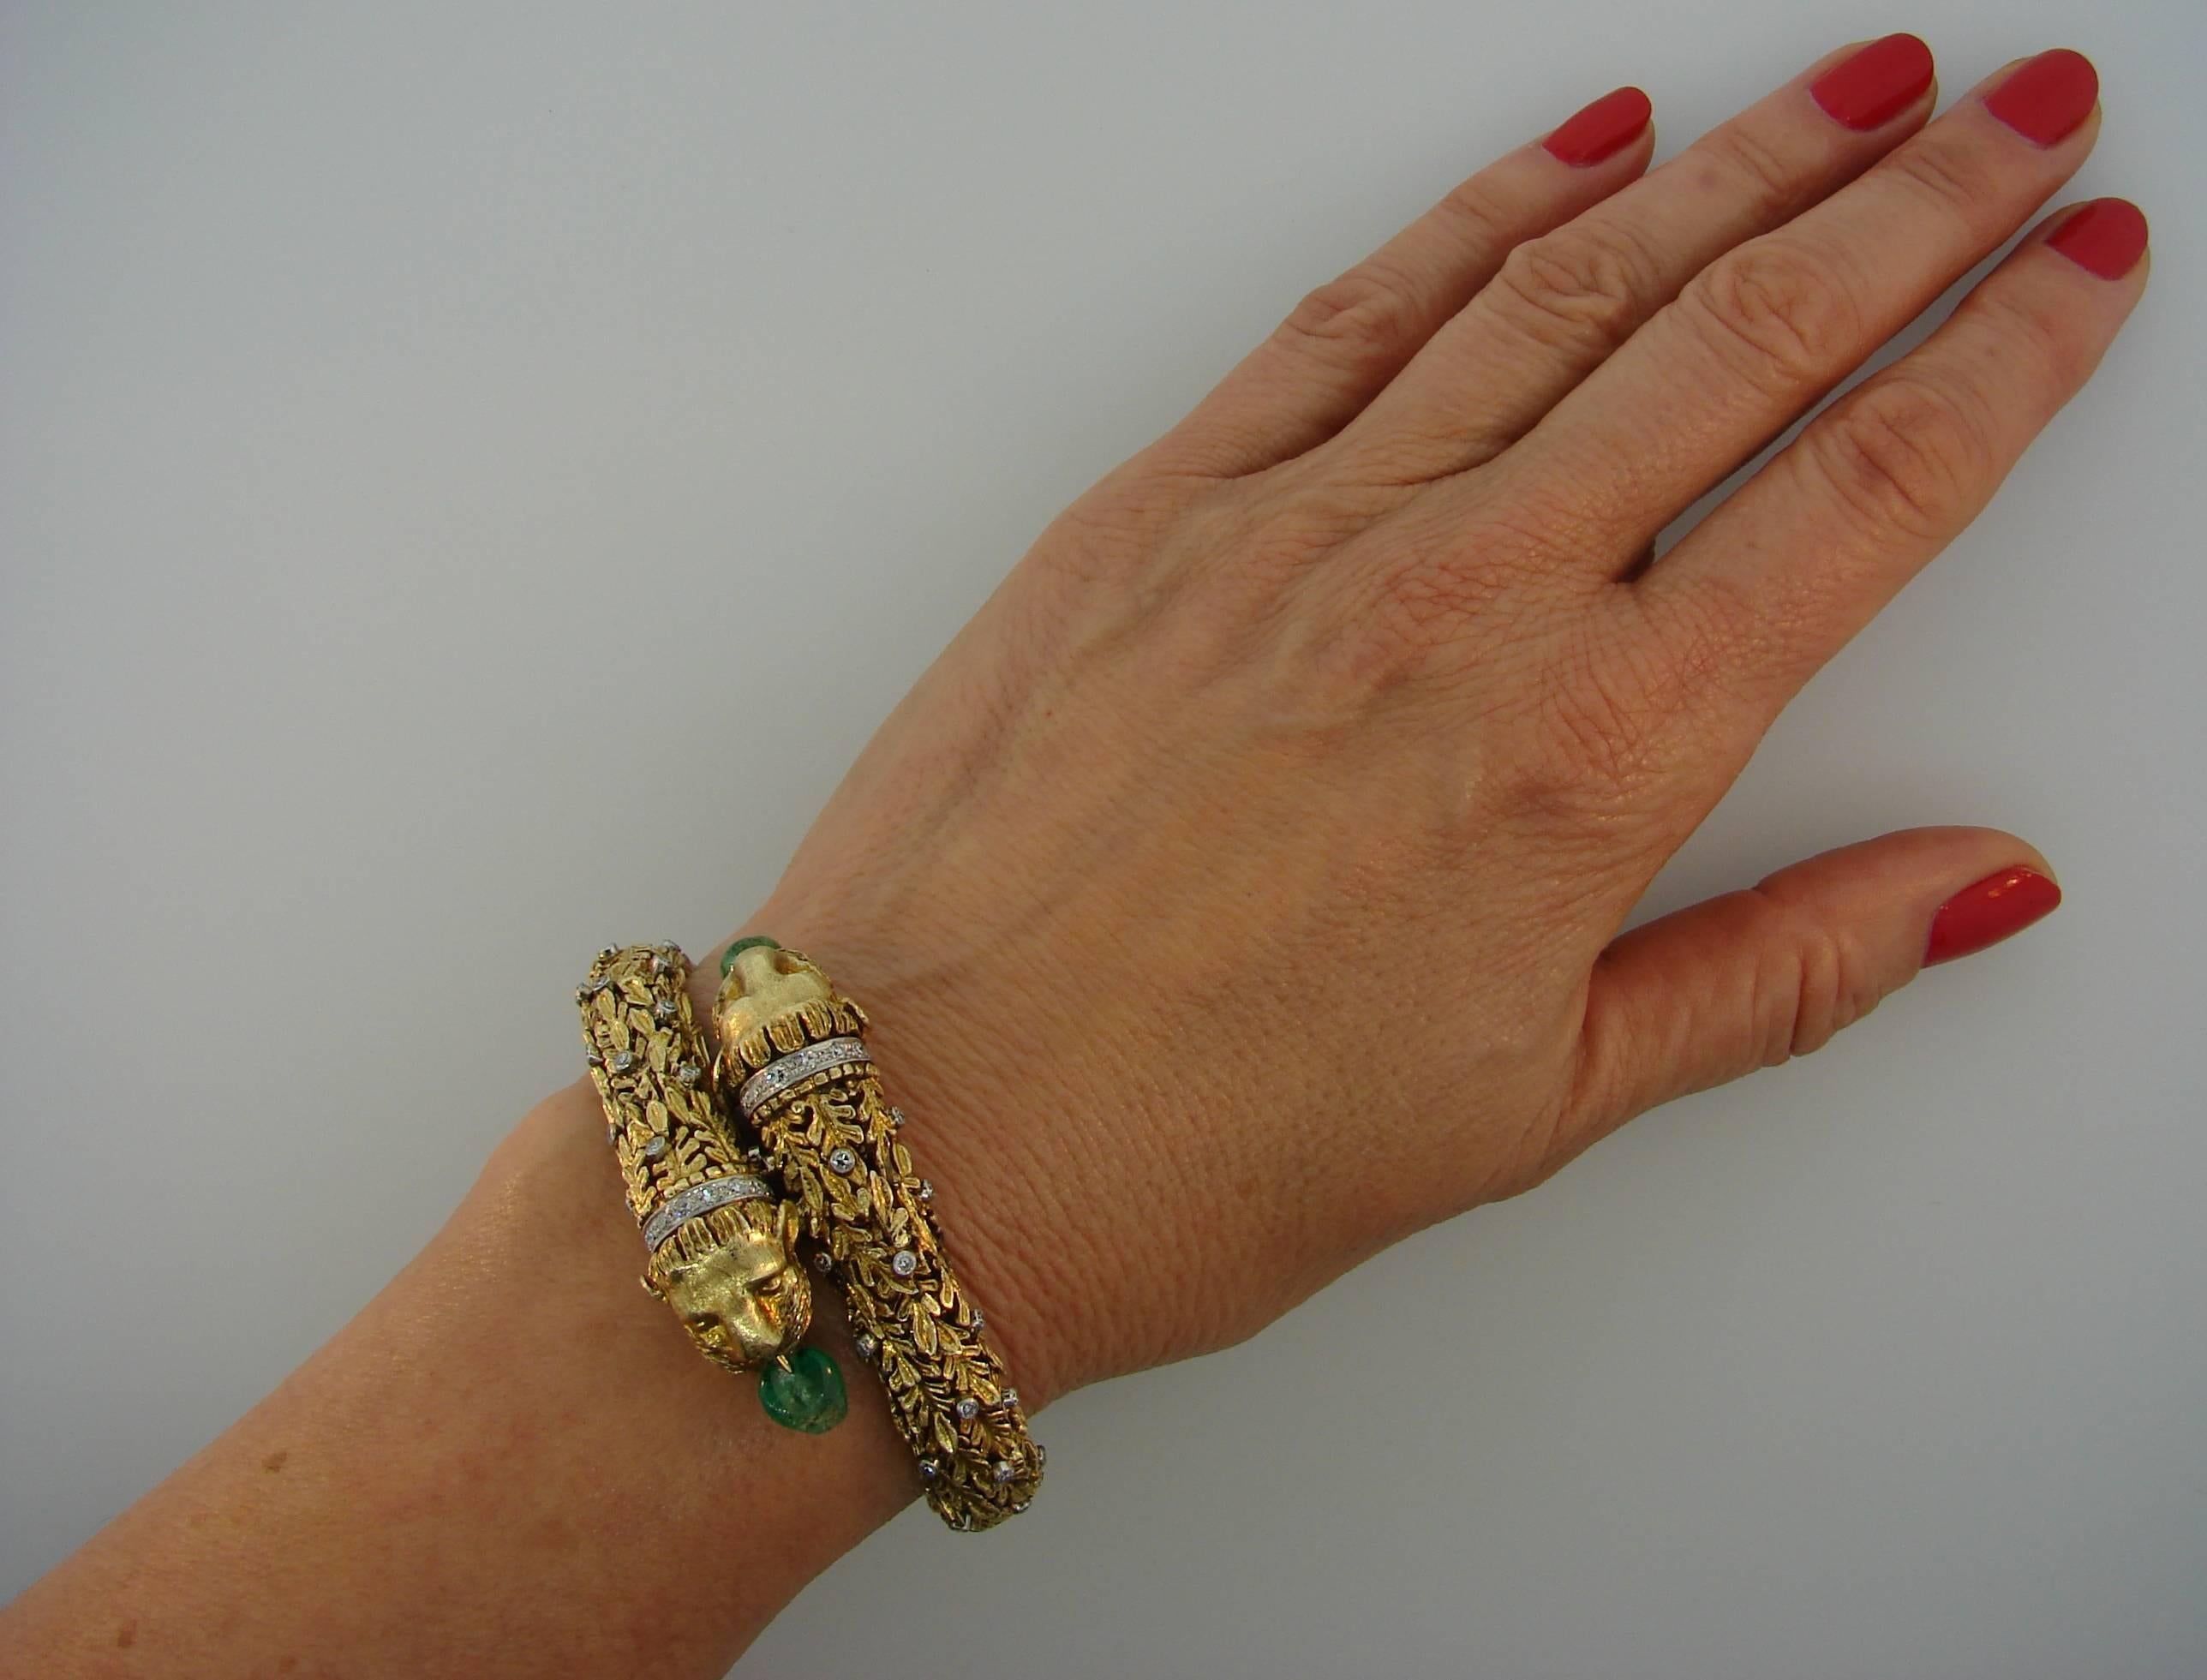 Recognizable Chimera Heads bangle bracelet created by Zolotas in the 1970's. Ornate and made with great attention to details, it is definitely a conversational piece. 
It is made of 18 karat yellow gold, set with single cut diamonds and two emerald